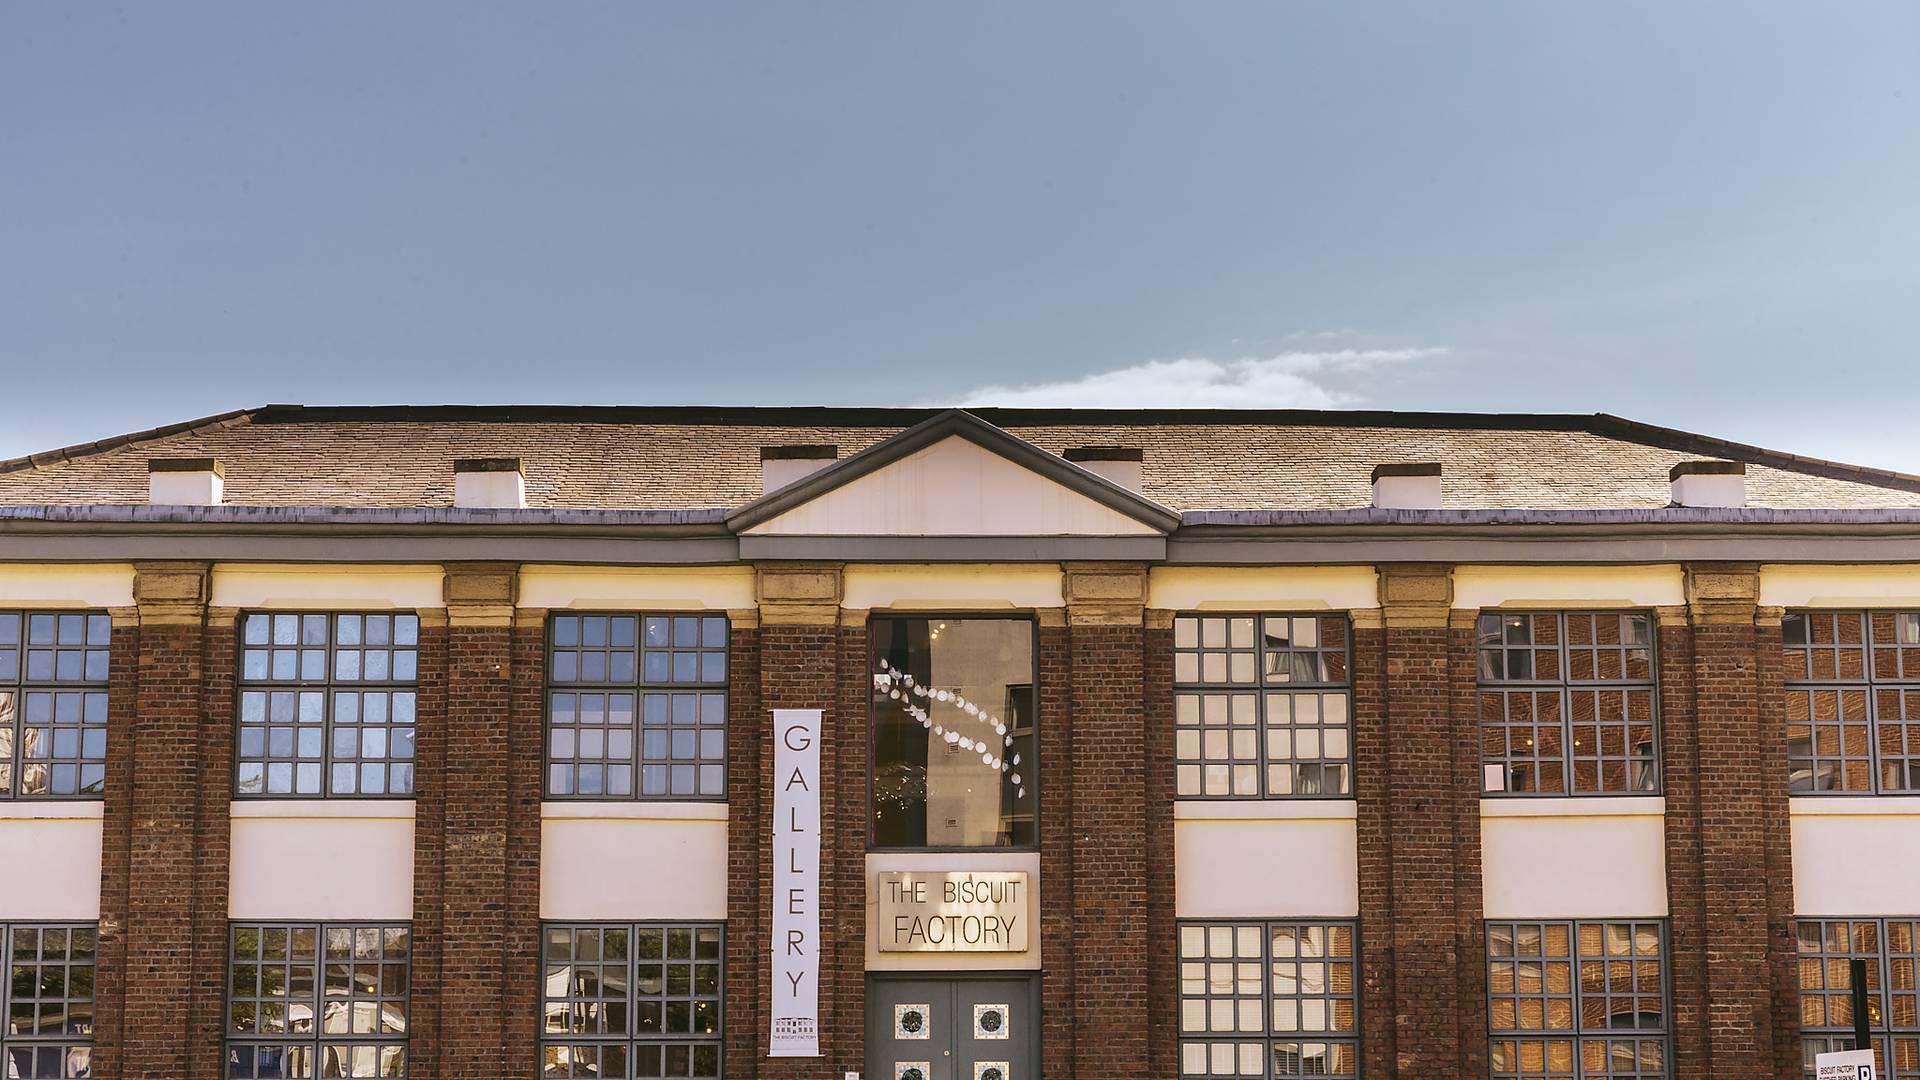 The Biscuit Factory photo